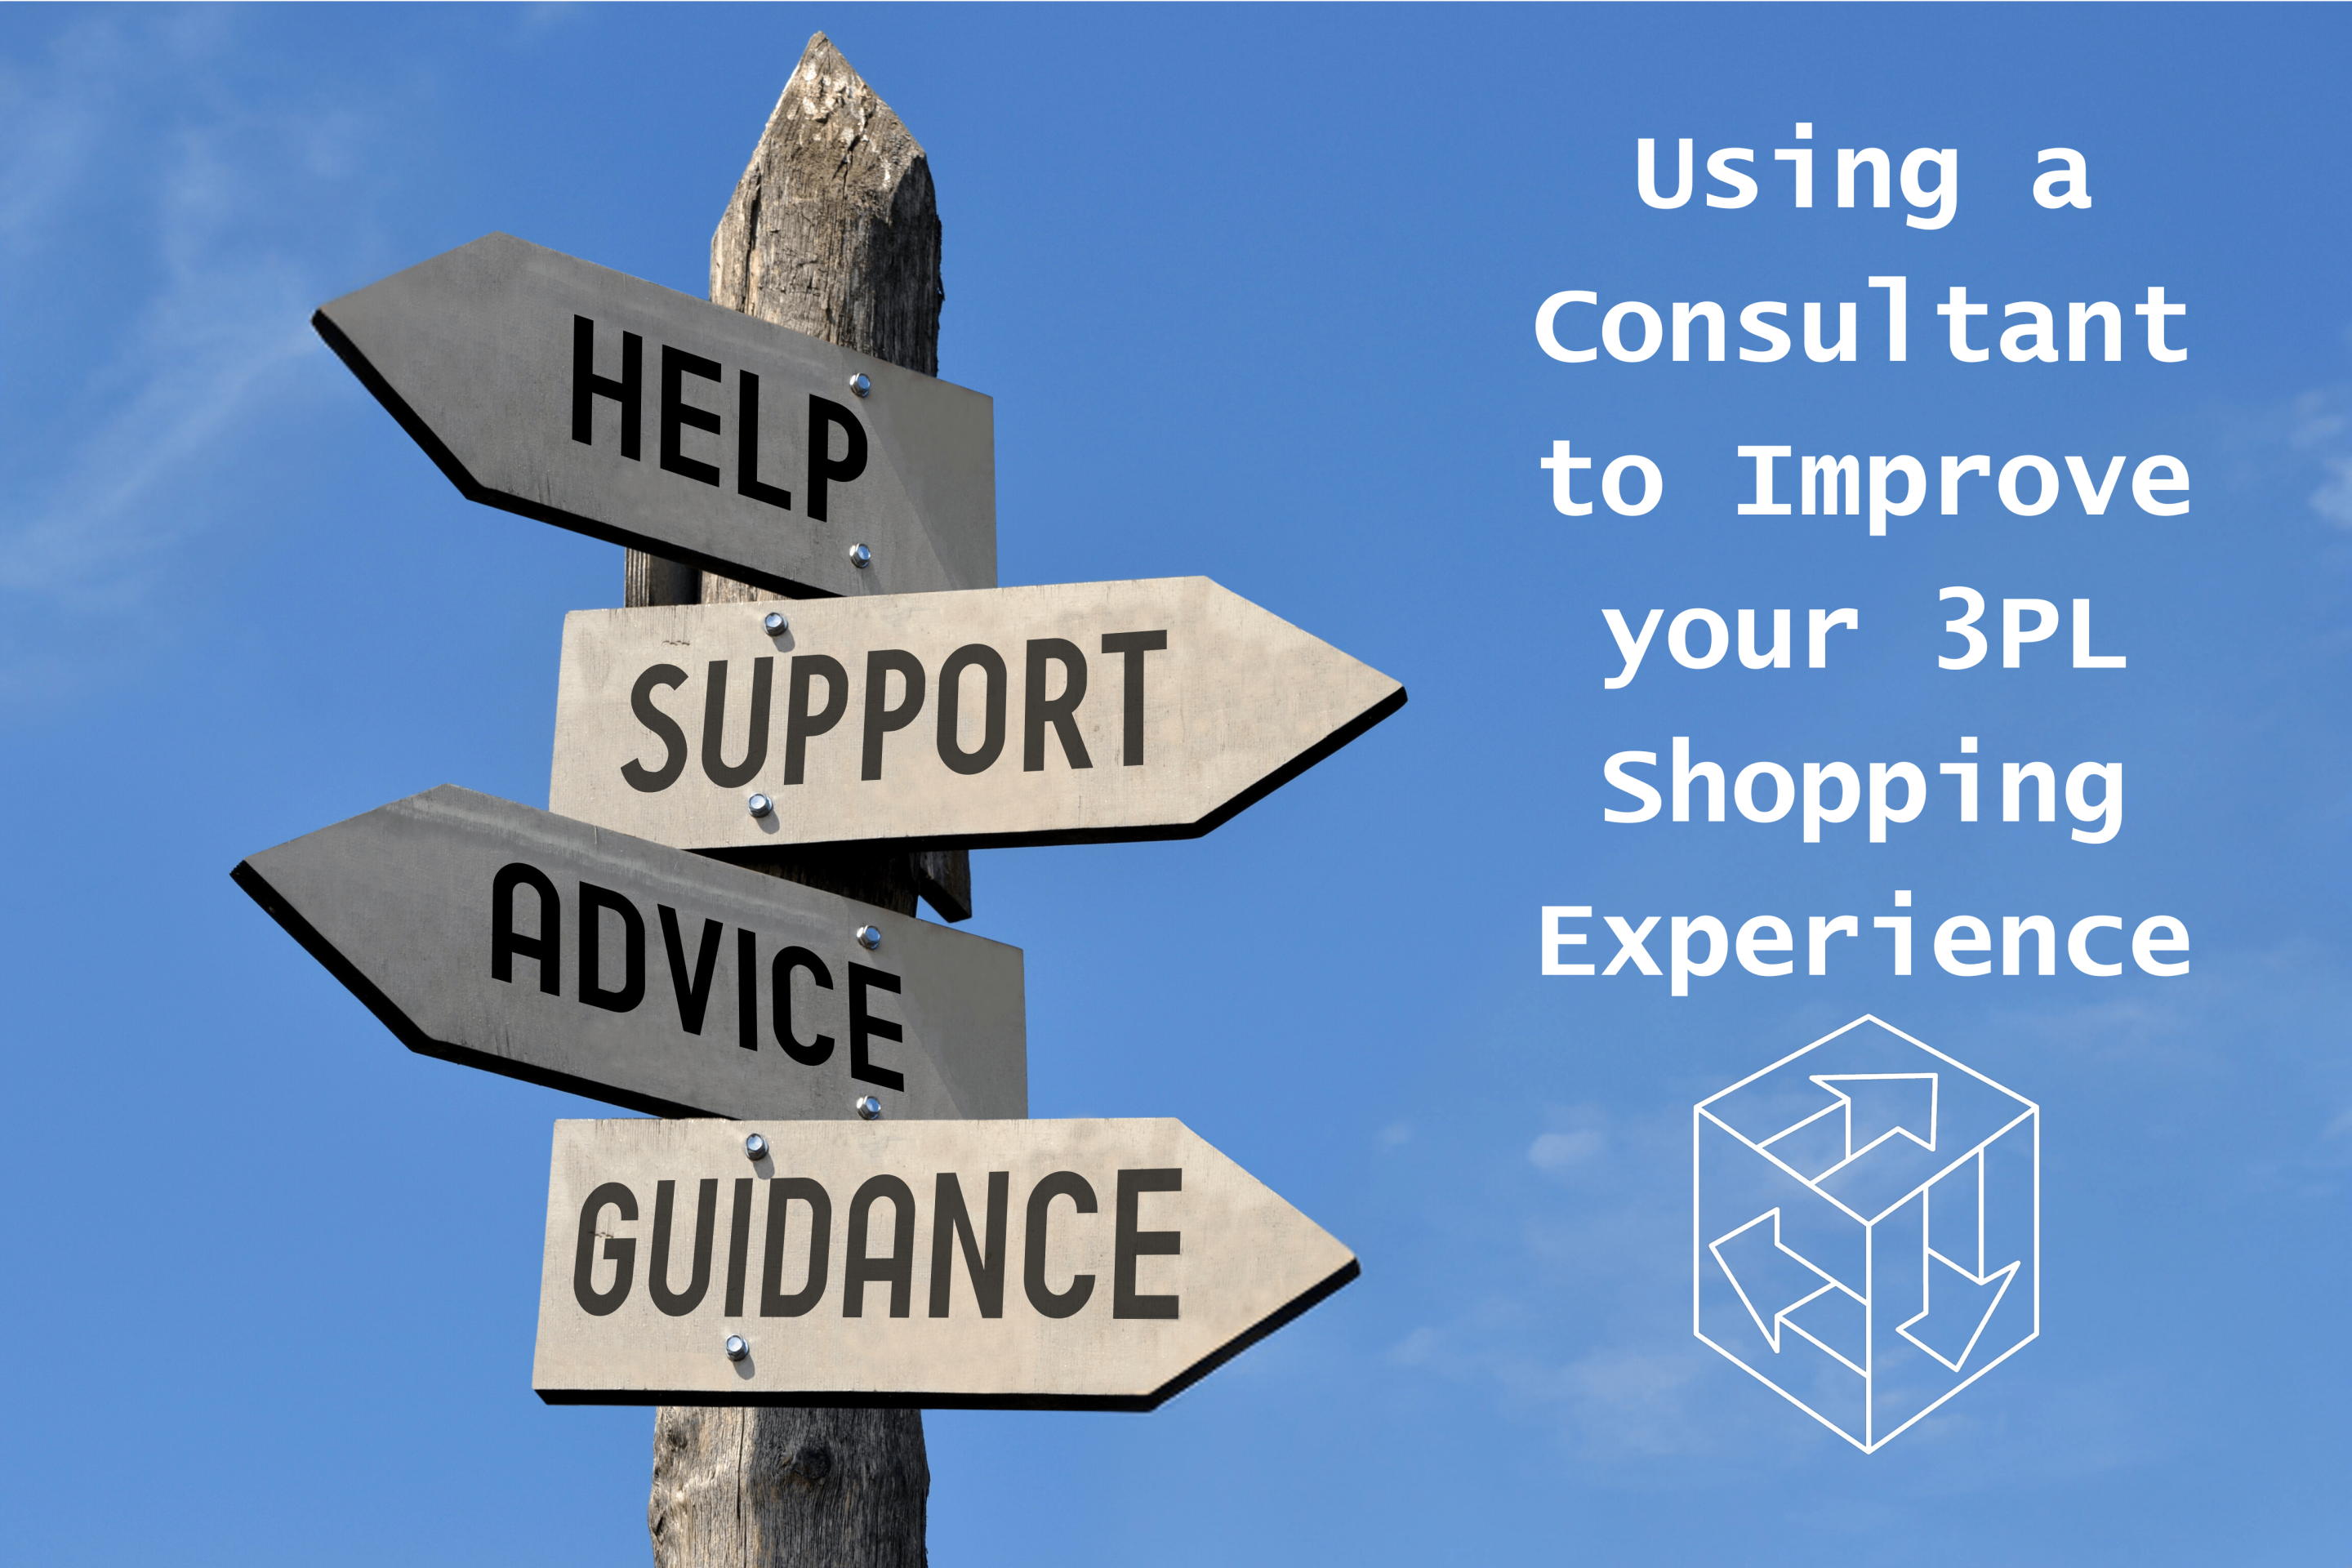 Using a Consultant for your 3PL Shopping with a guidepost containing "Help", "Support", "Advice", and "Guidance".